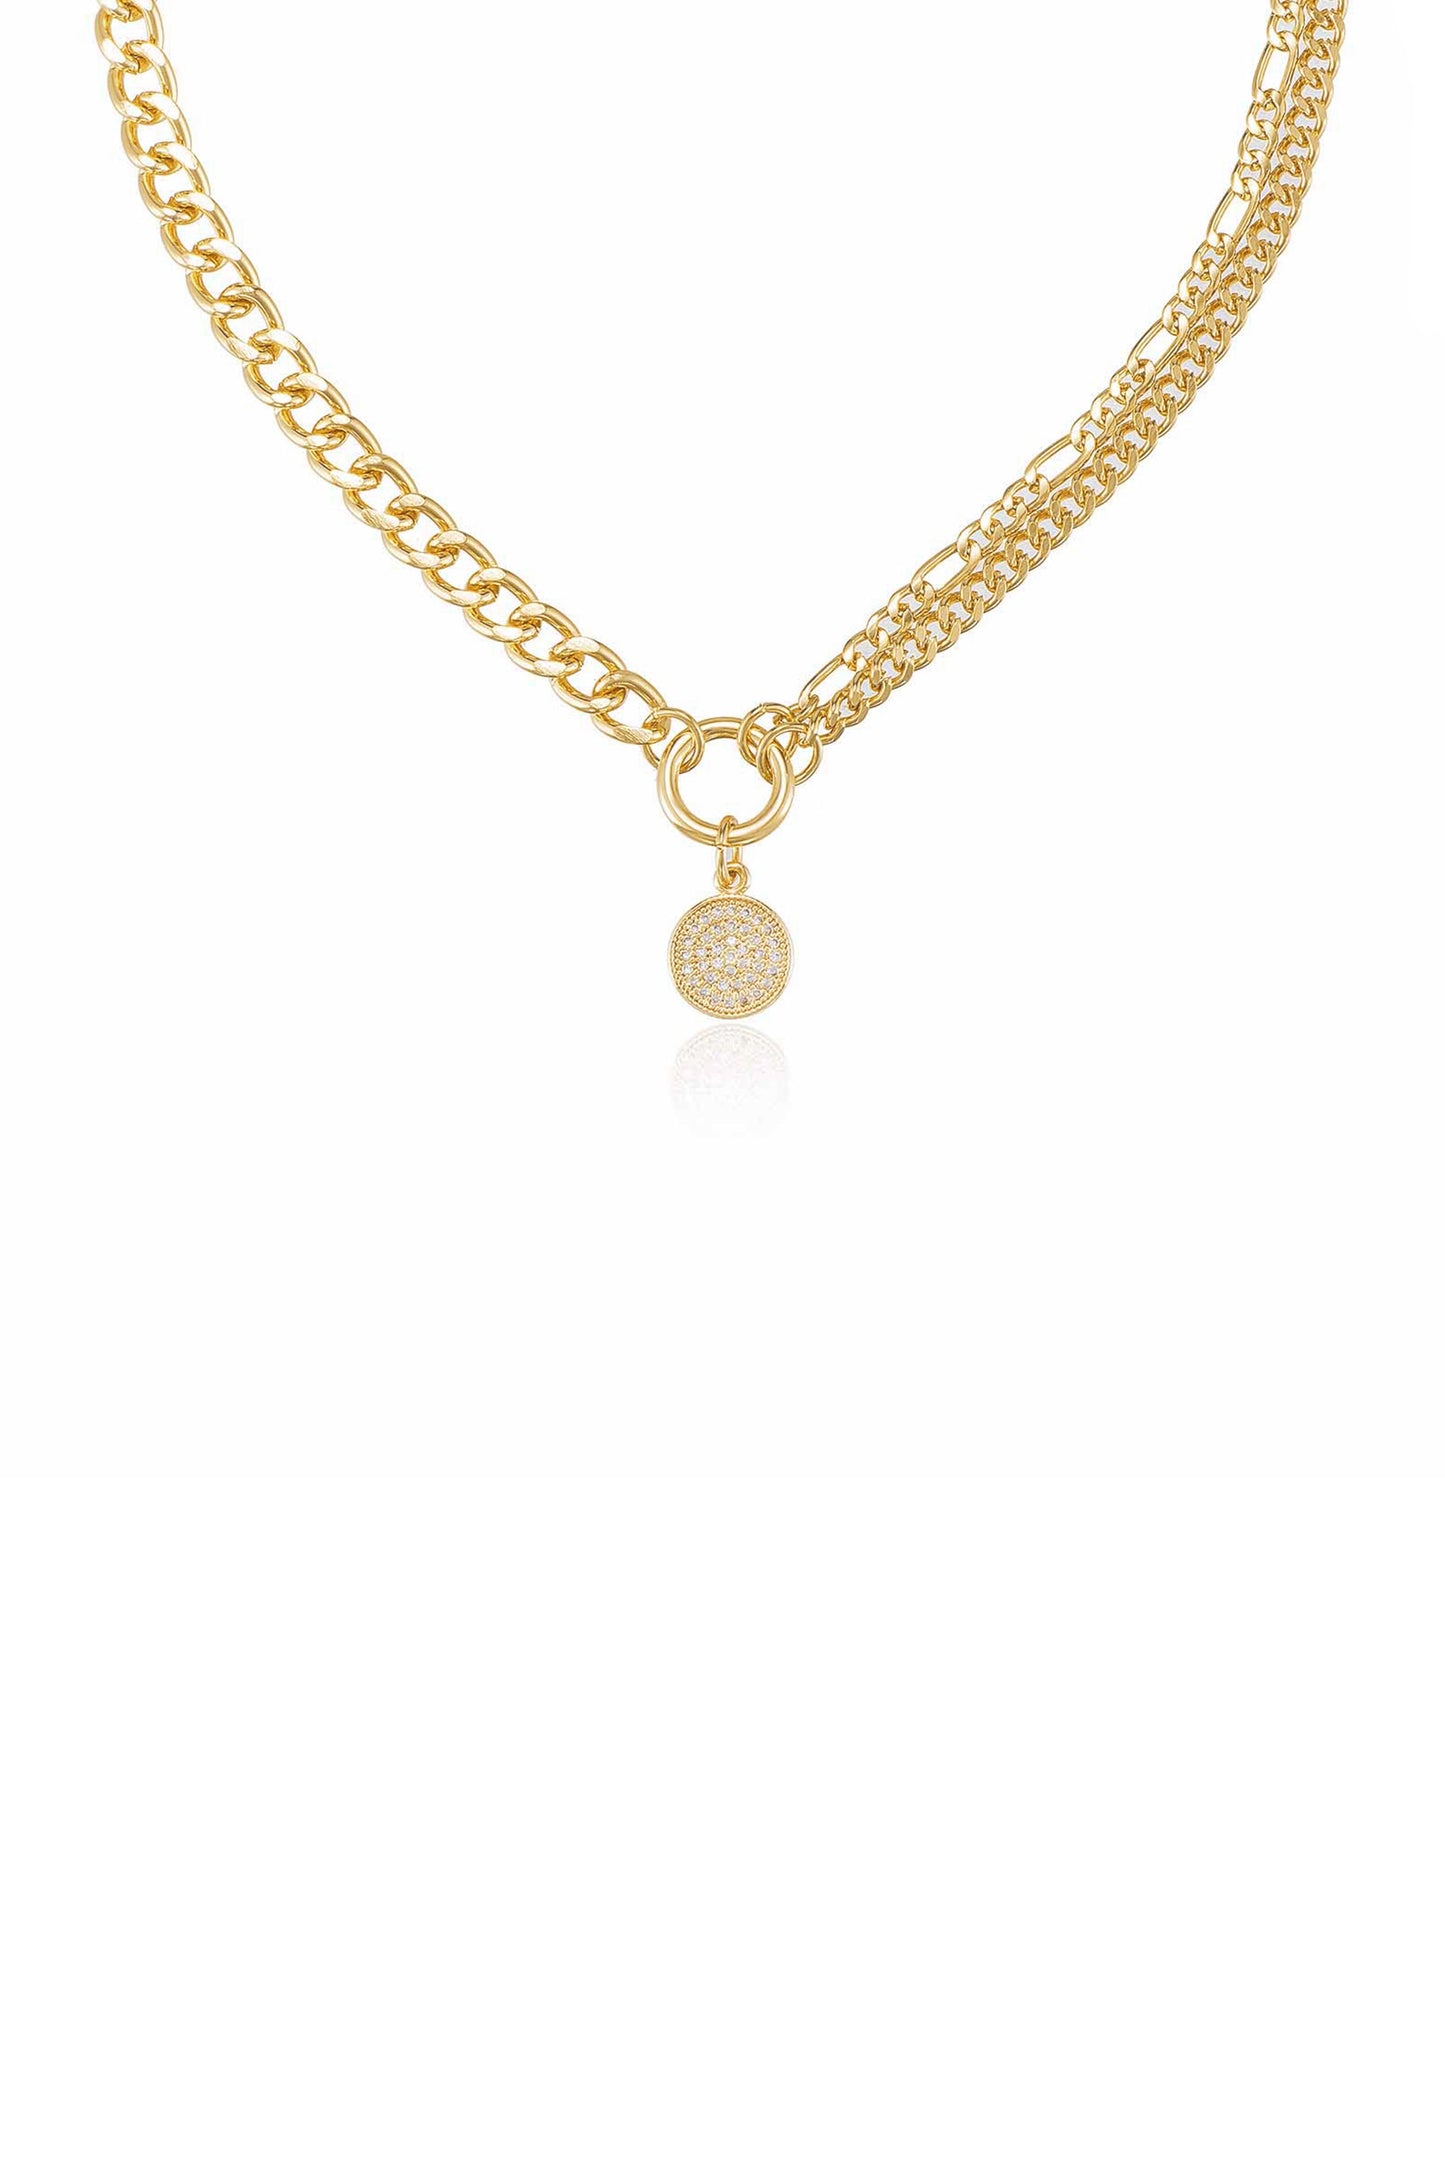 Three Chains 18k Gold Plated Necklace